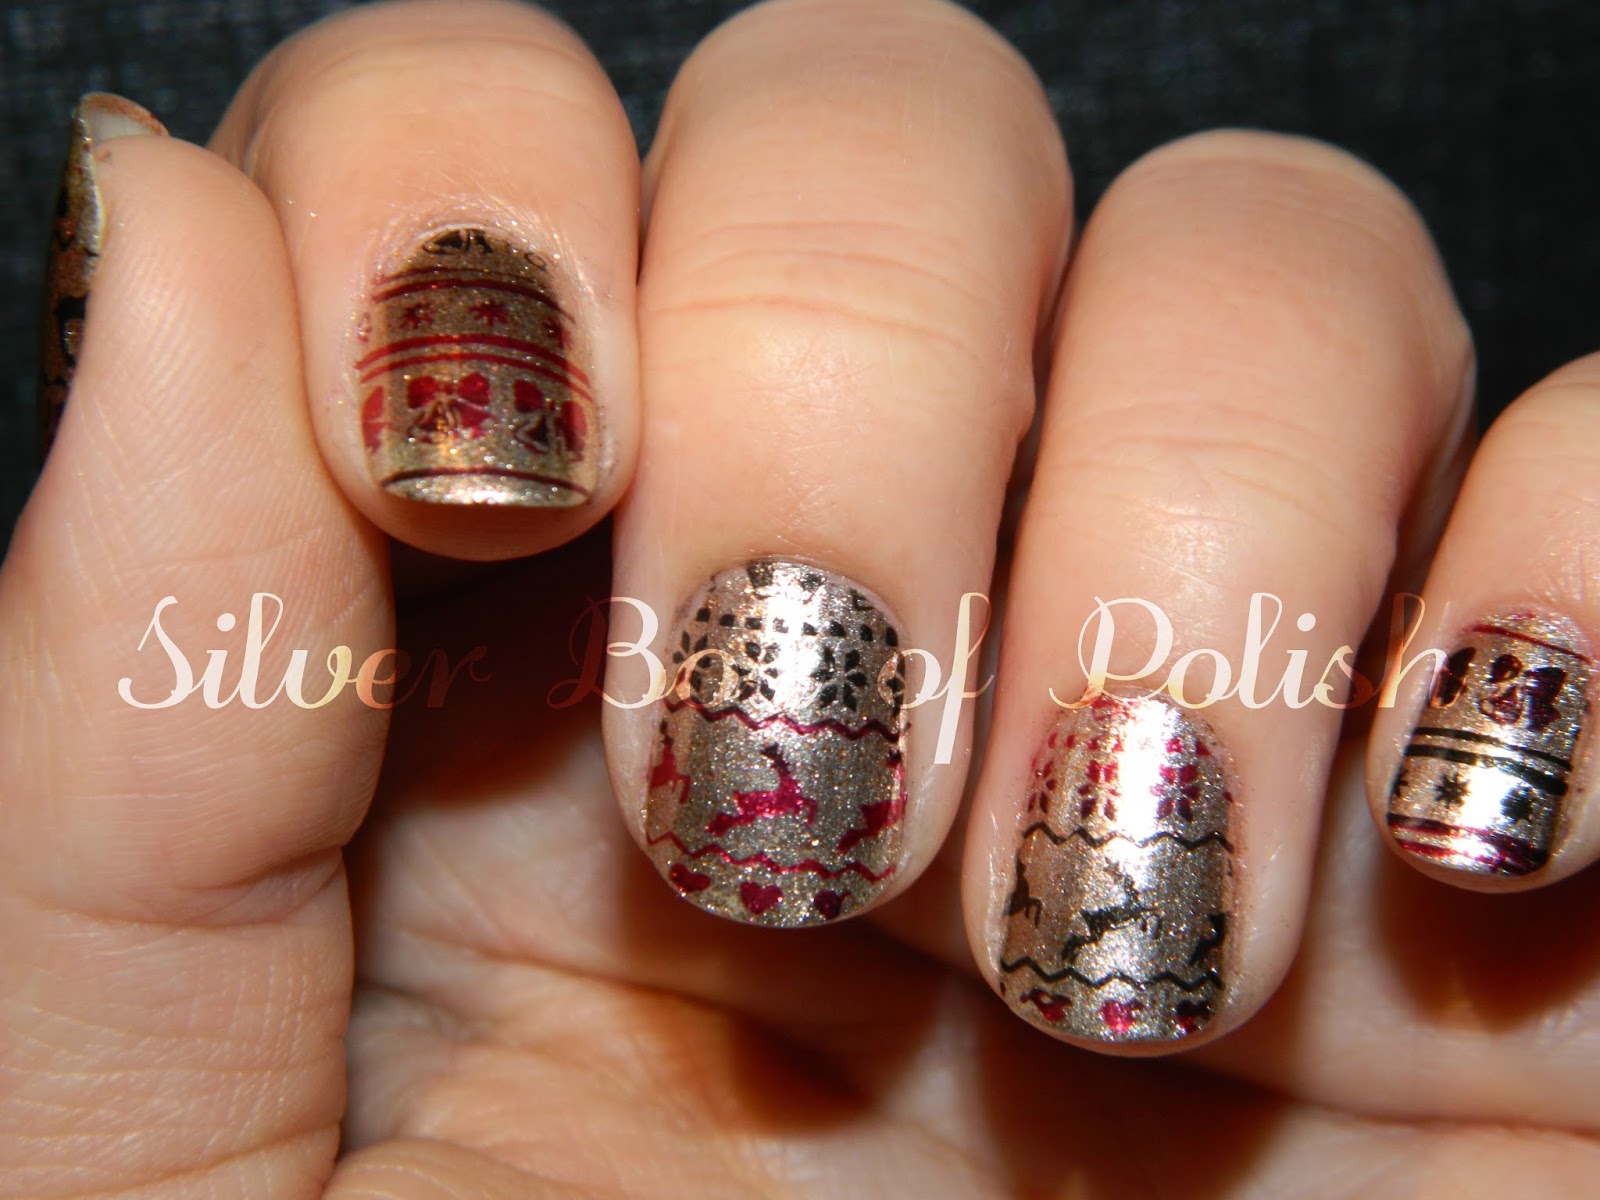 3. Easy DIY Christmas Sweater Nails - wide 5